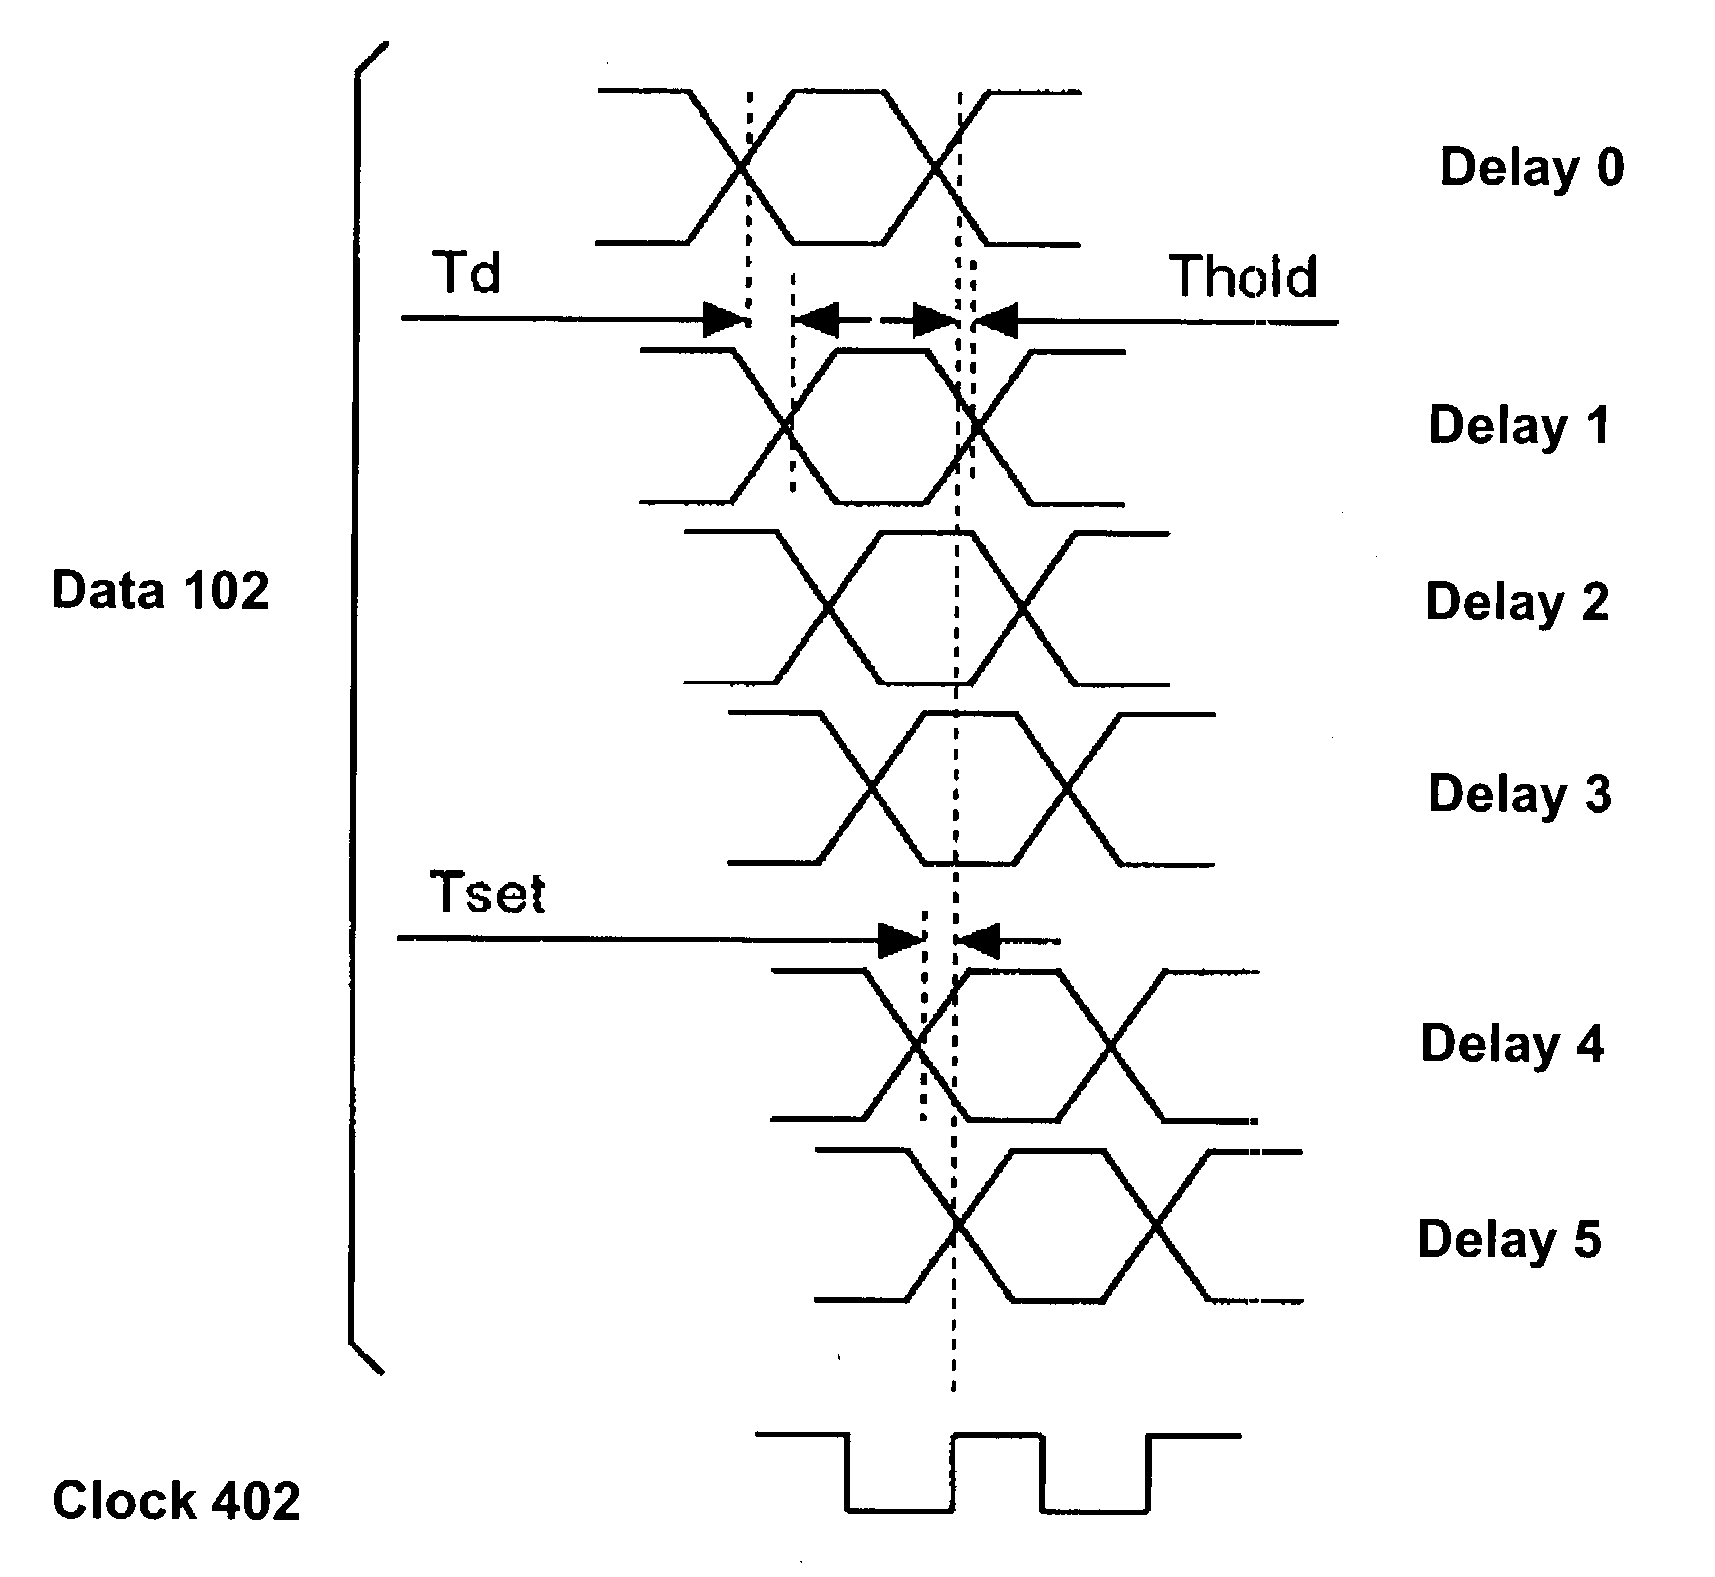 Deskew circuit and disk array control device using the deskew circuit, and deskew method